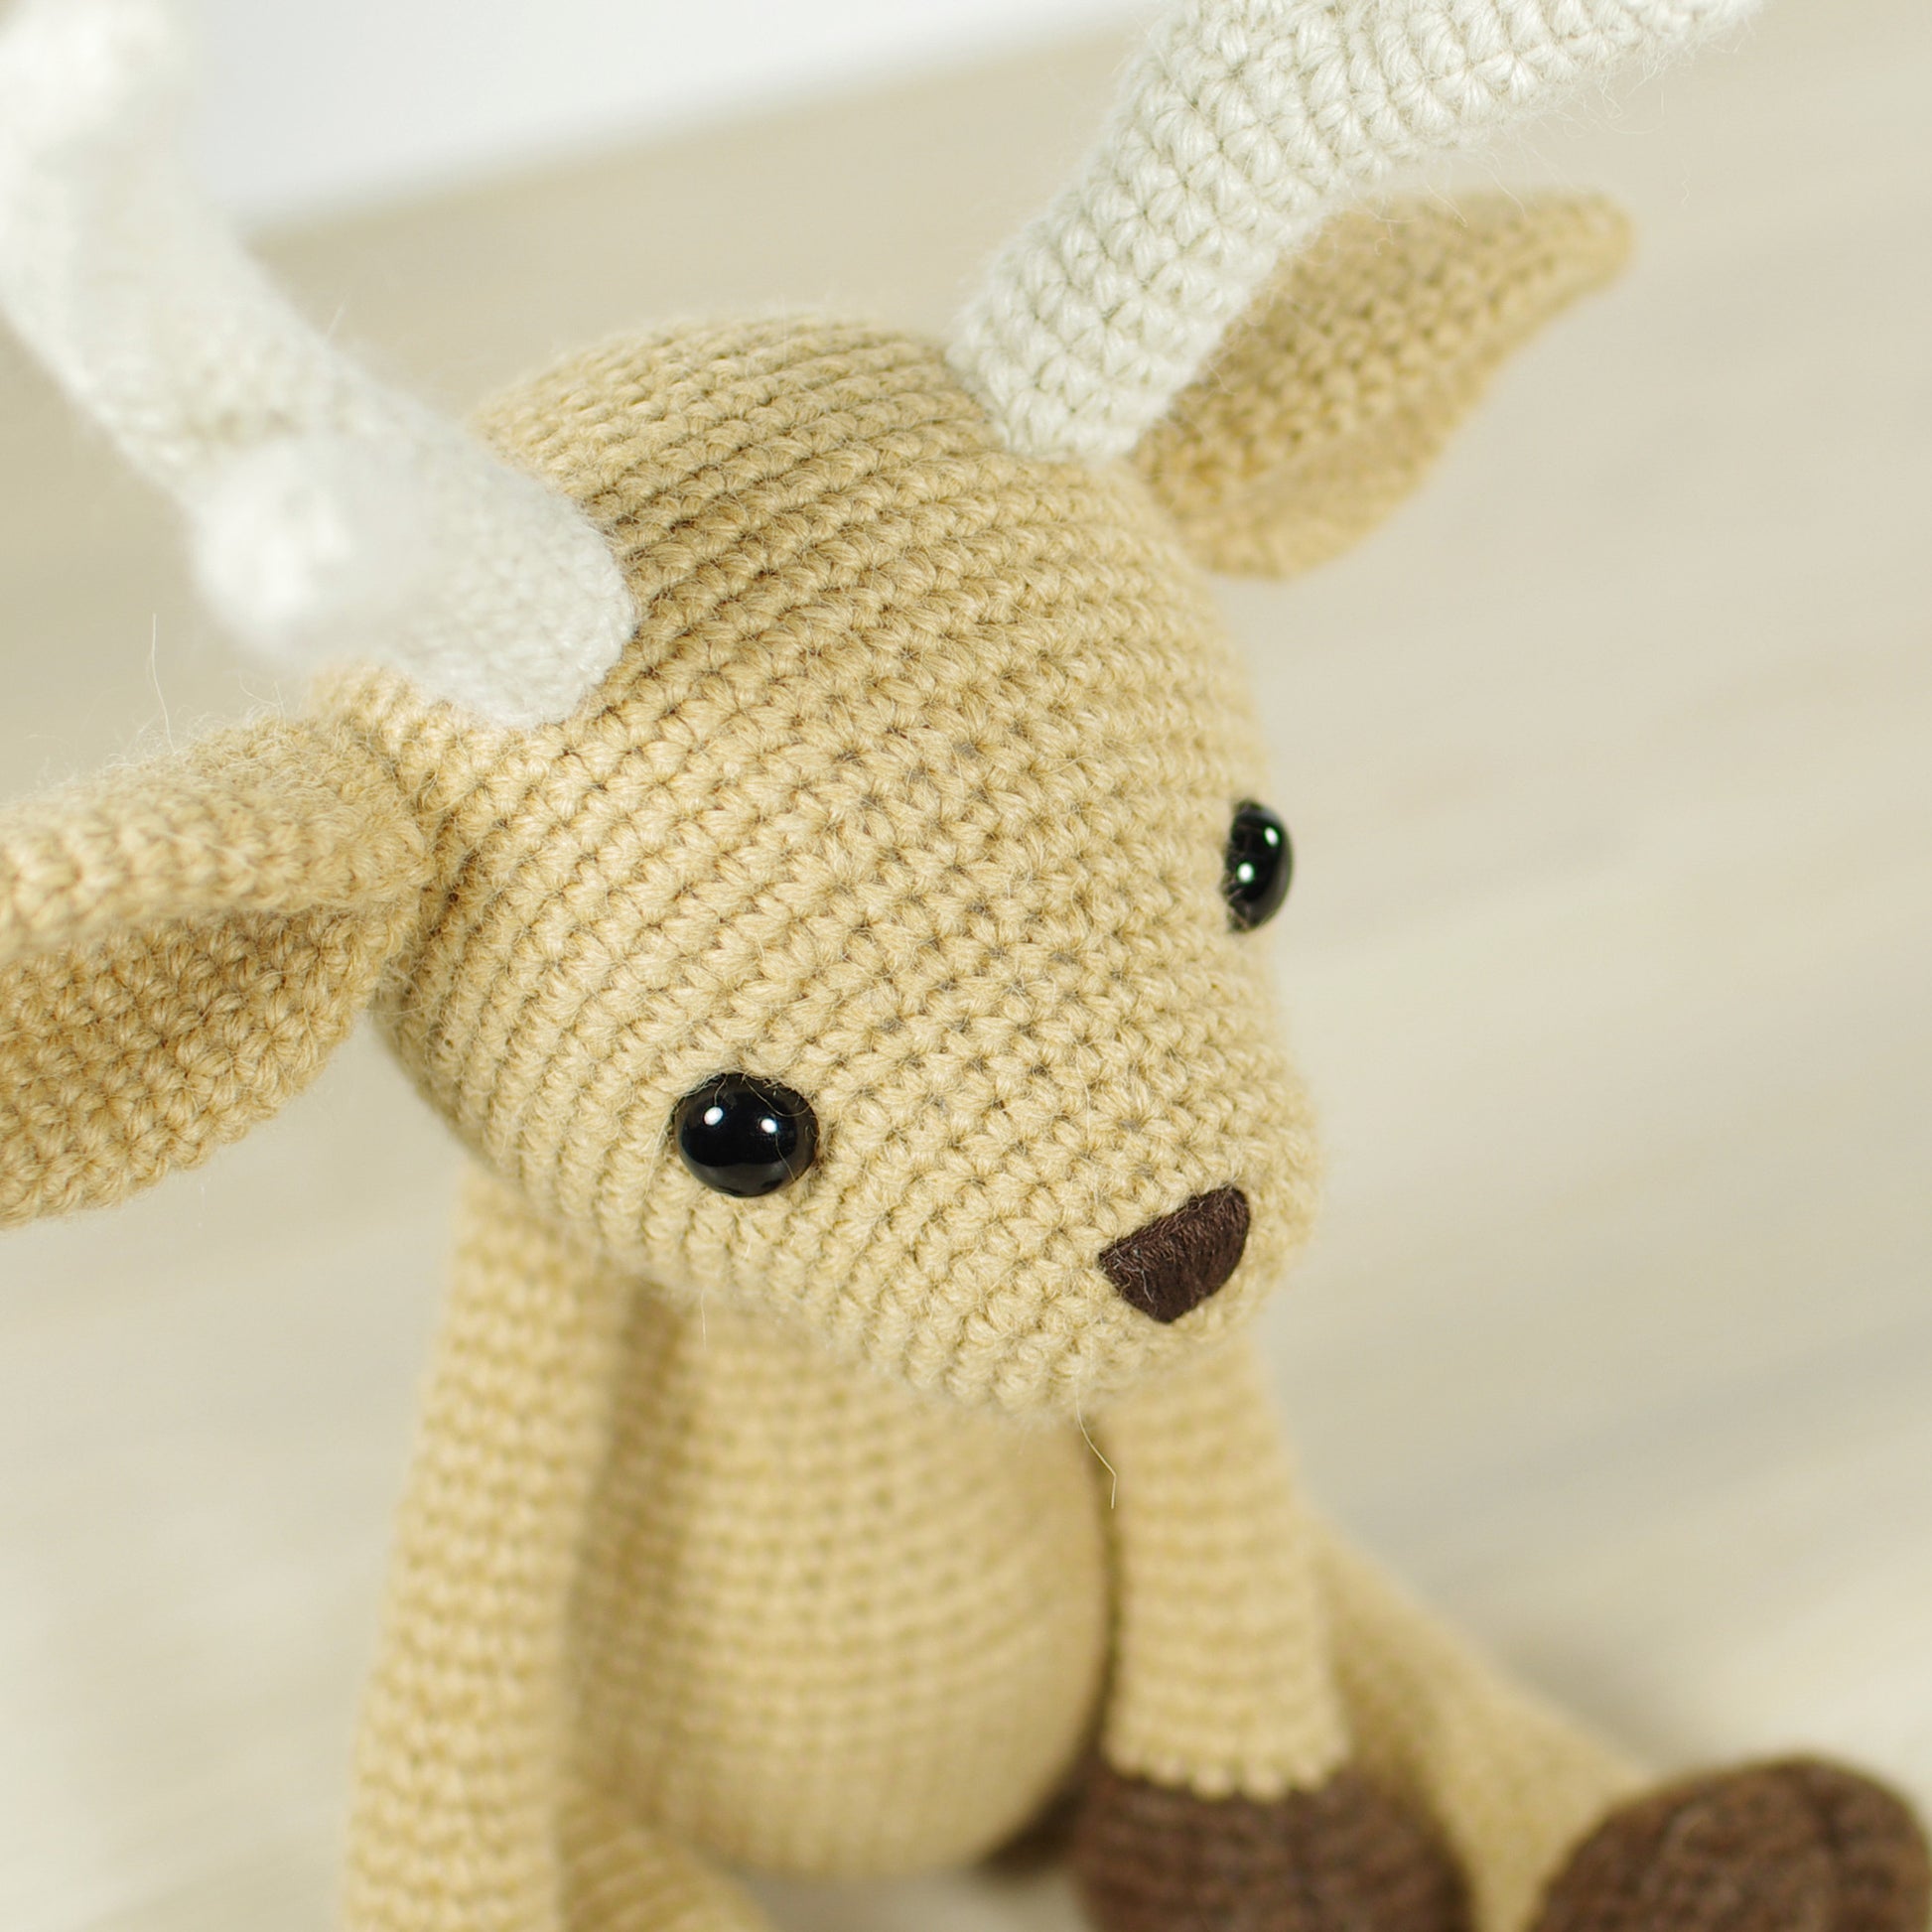 Black Goat Crochet Plush With Red Button Eyes 